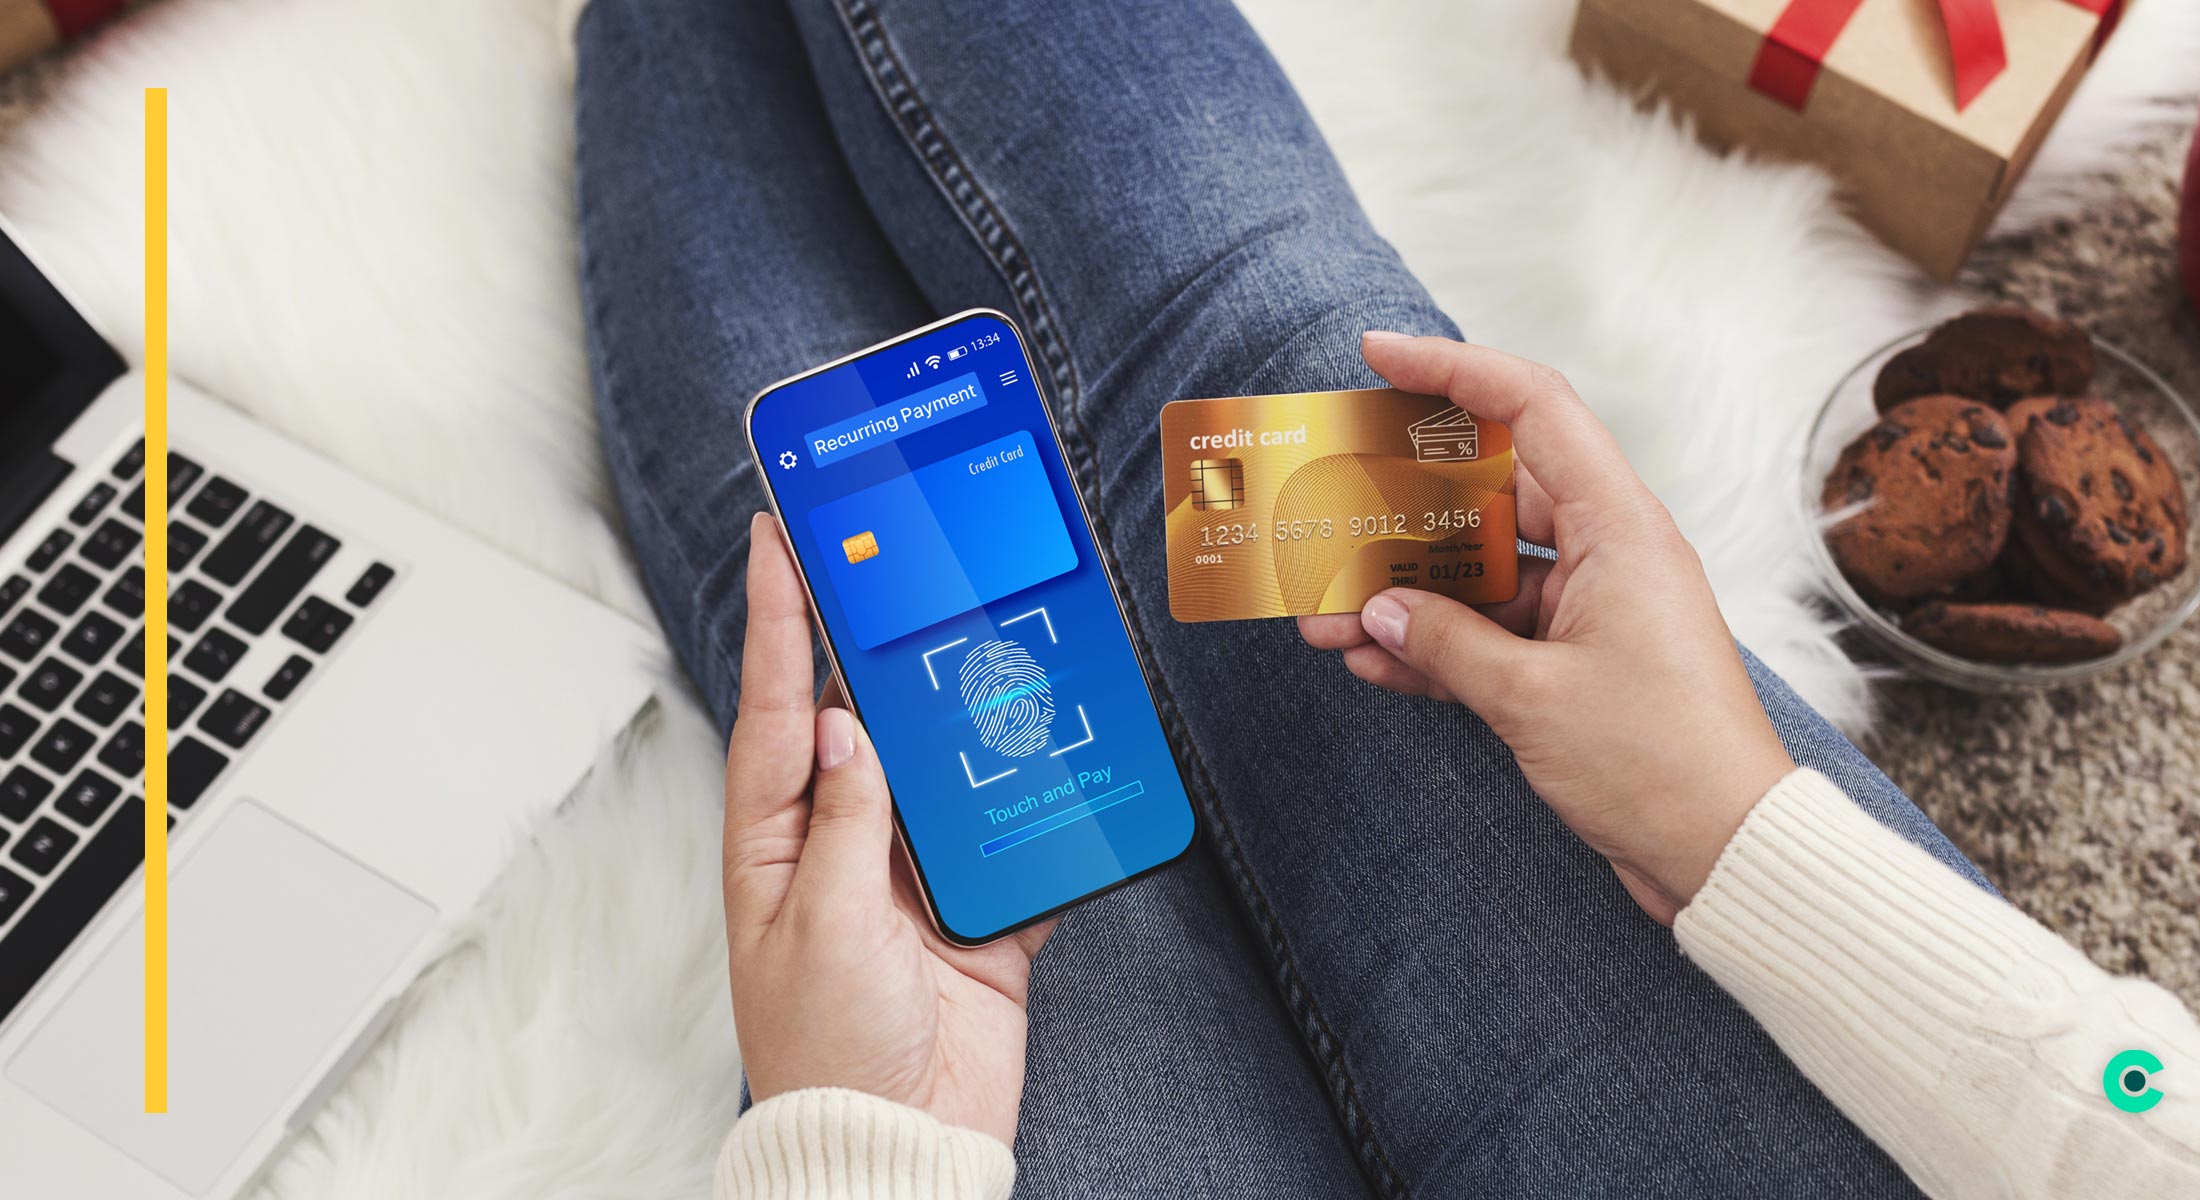 Woman holding credit card and mobile phone, completing setup of recurring payments